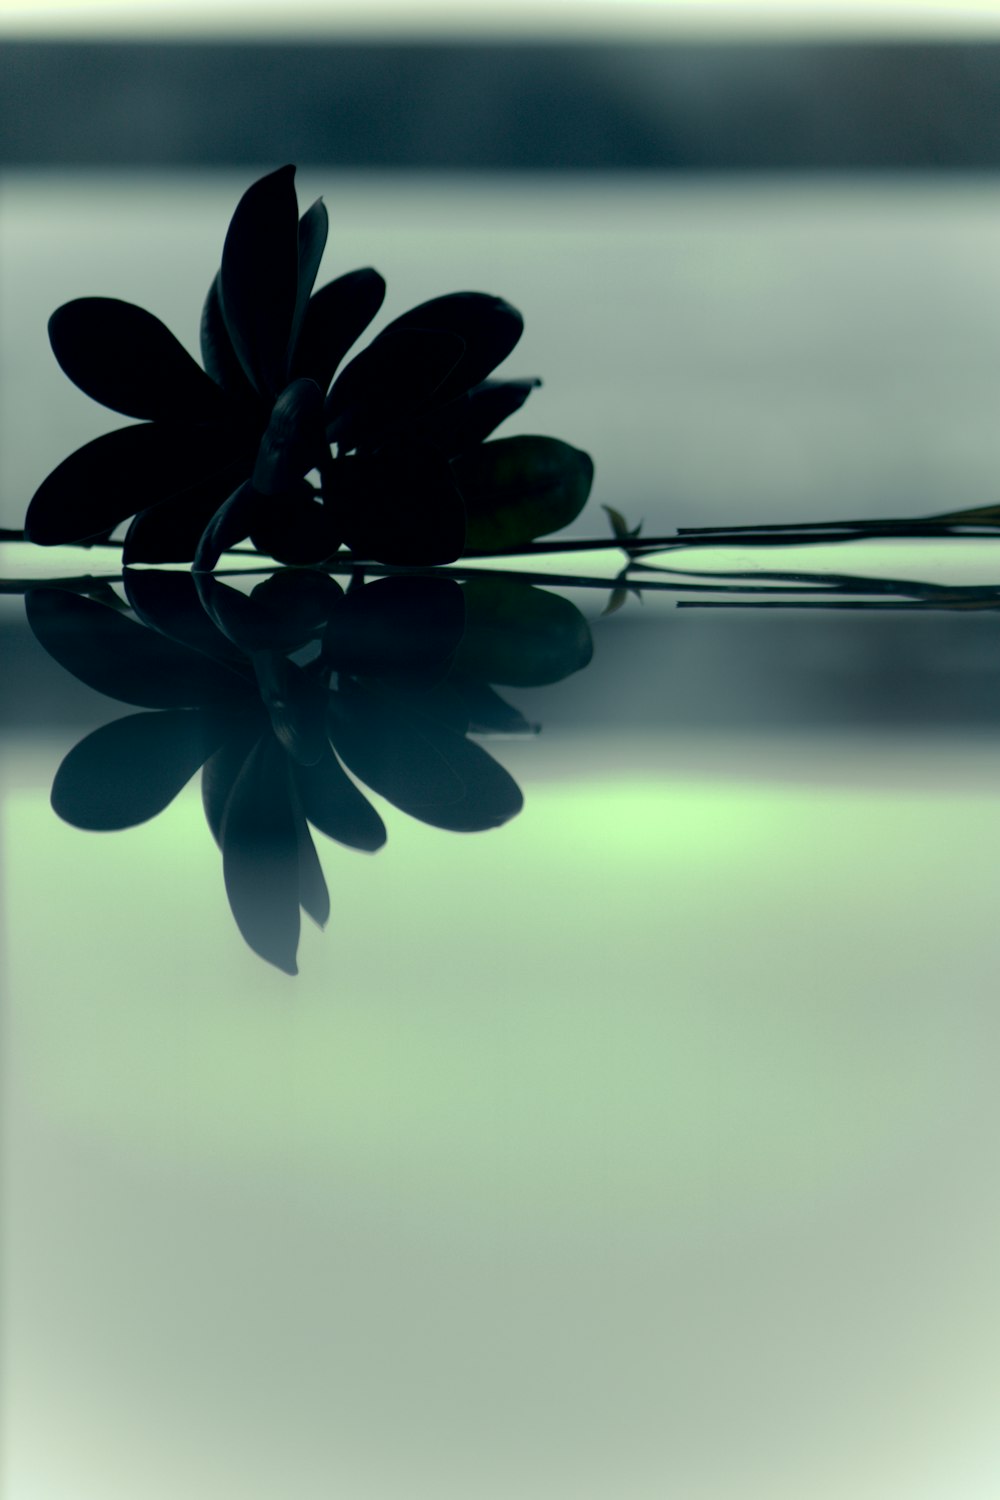 a single flower is reflected in the water